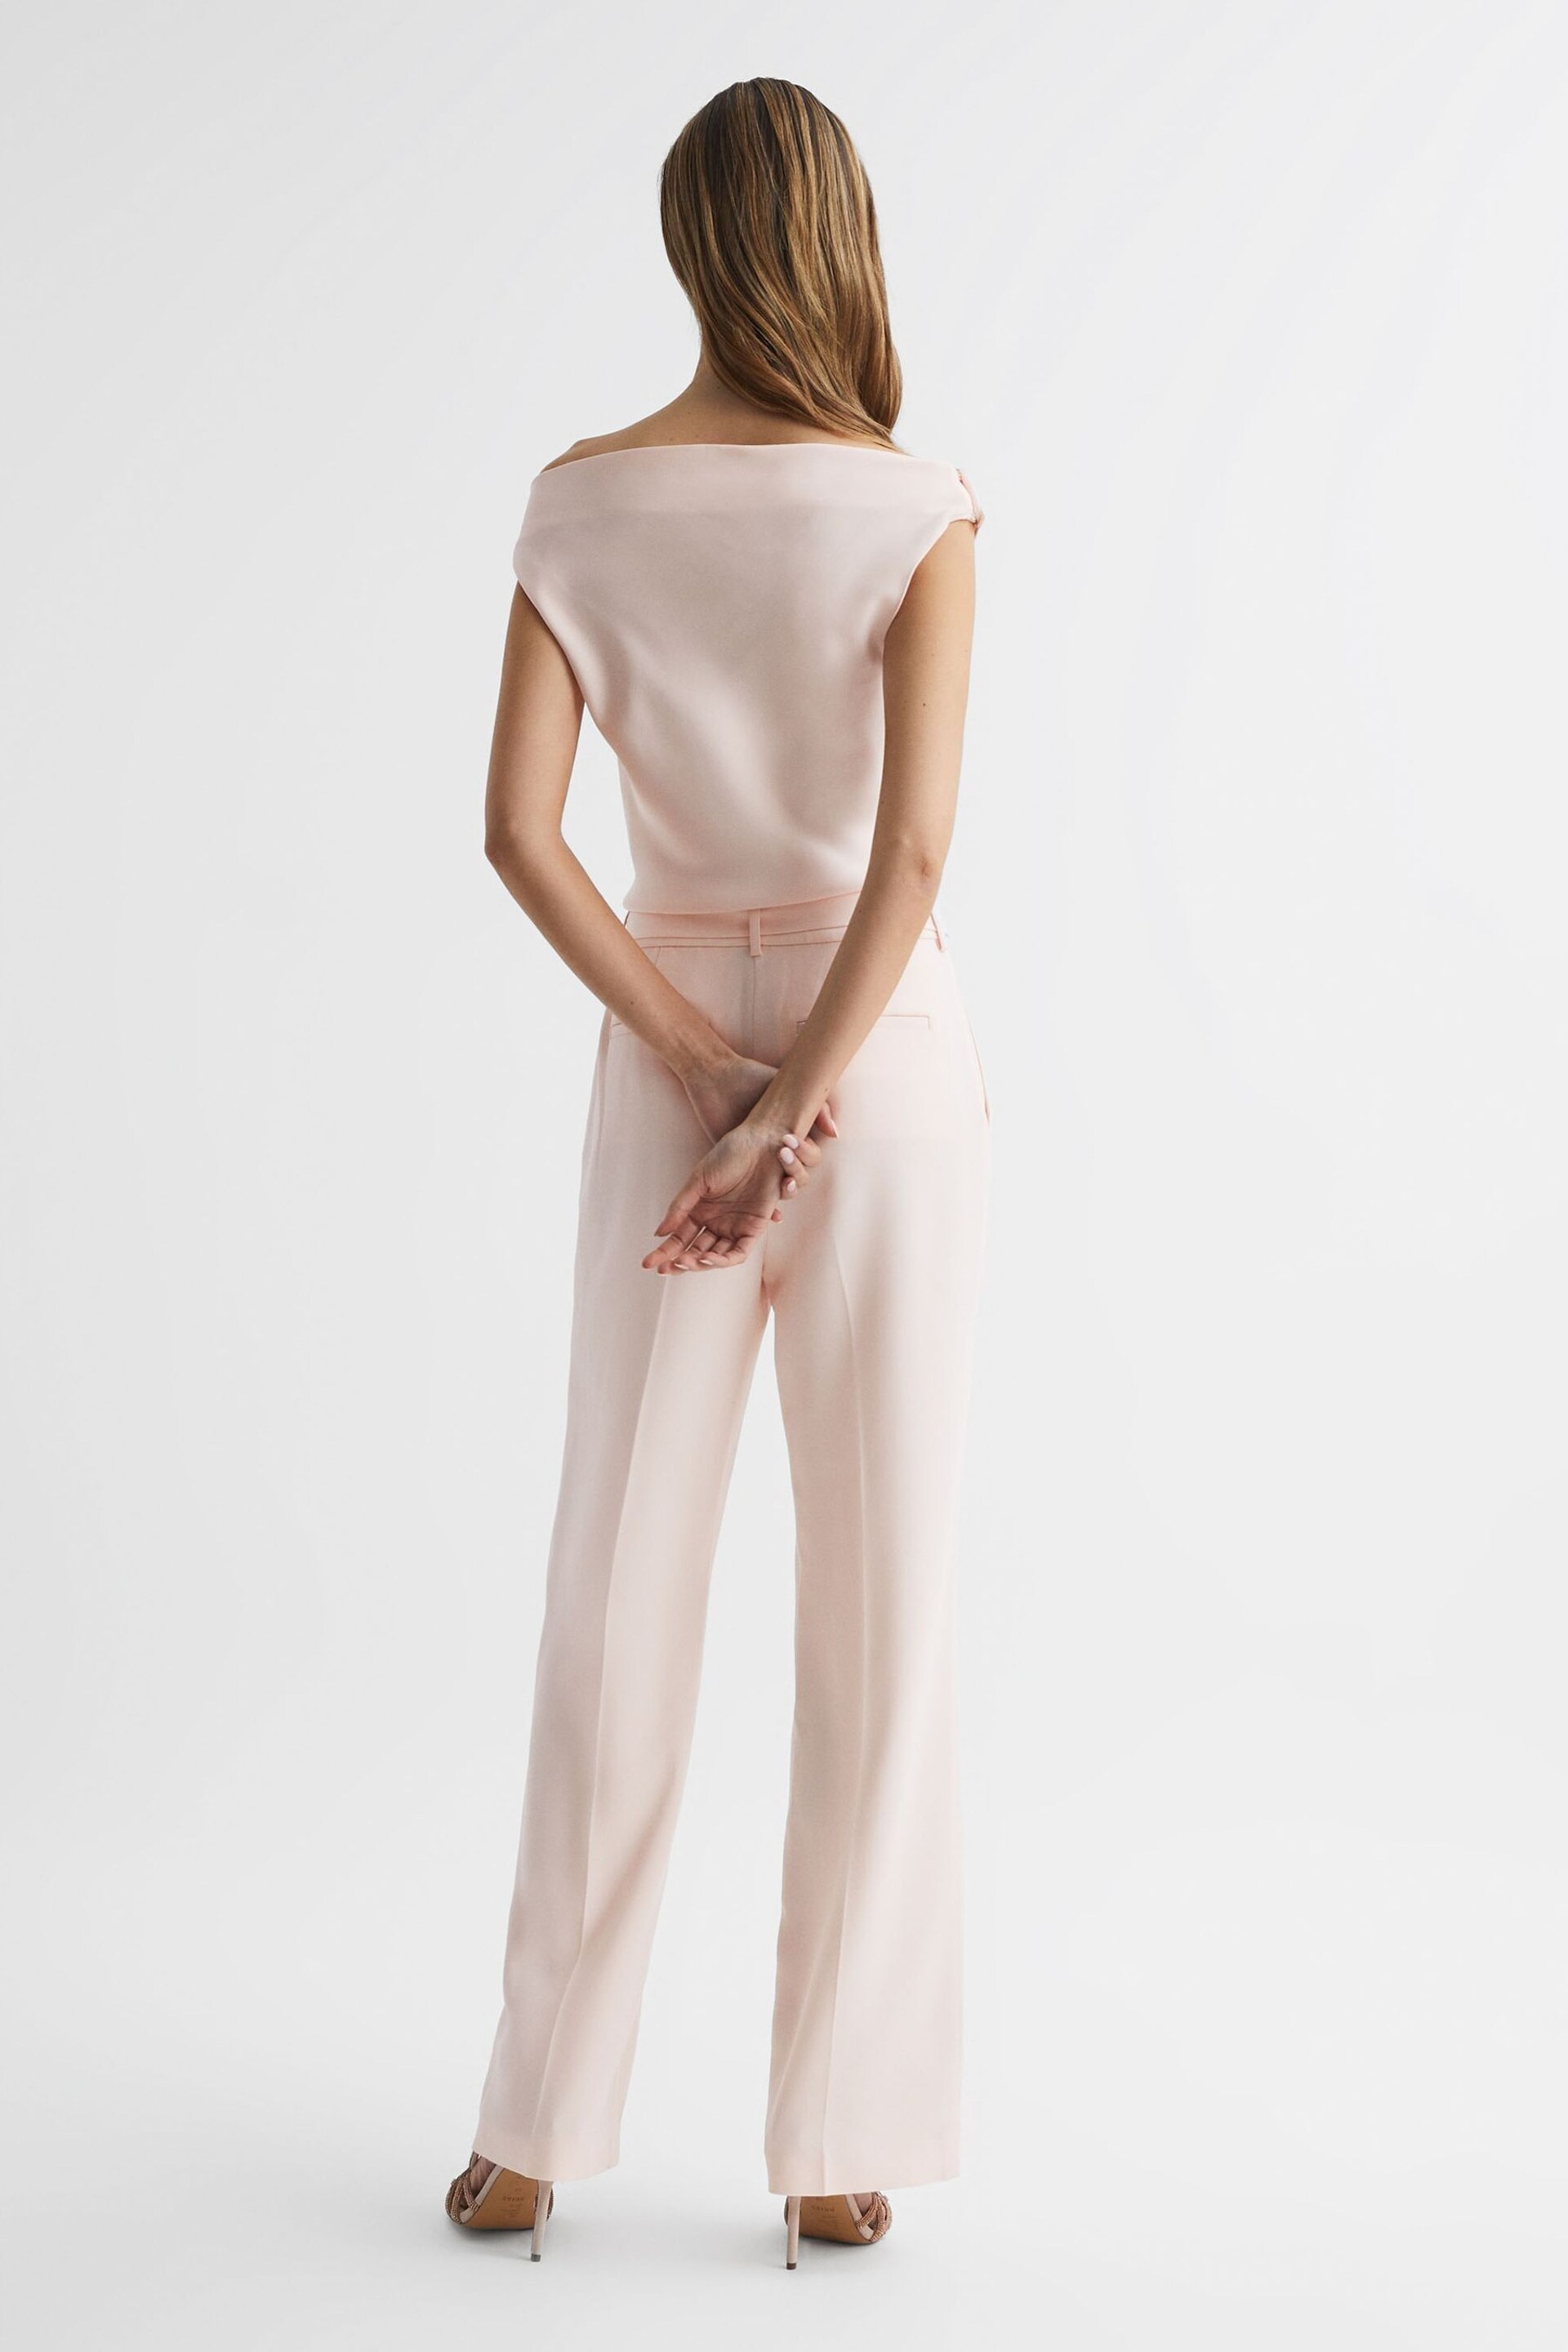 Reiss Nude Maple Petite Off-The-Shoulder Jumpsuit - Image 5 of 6